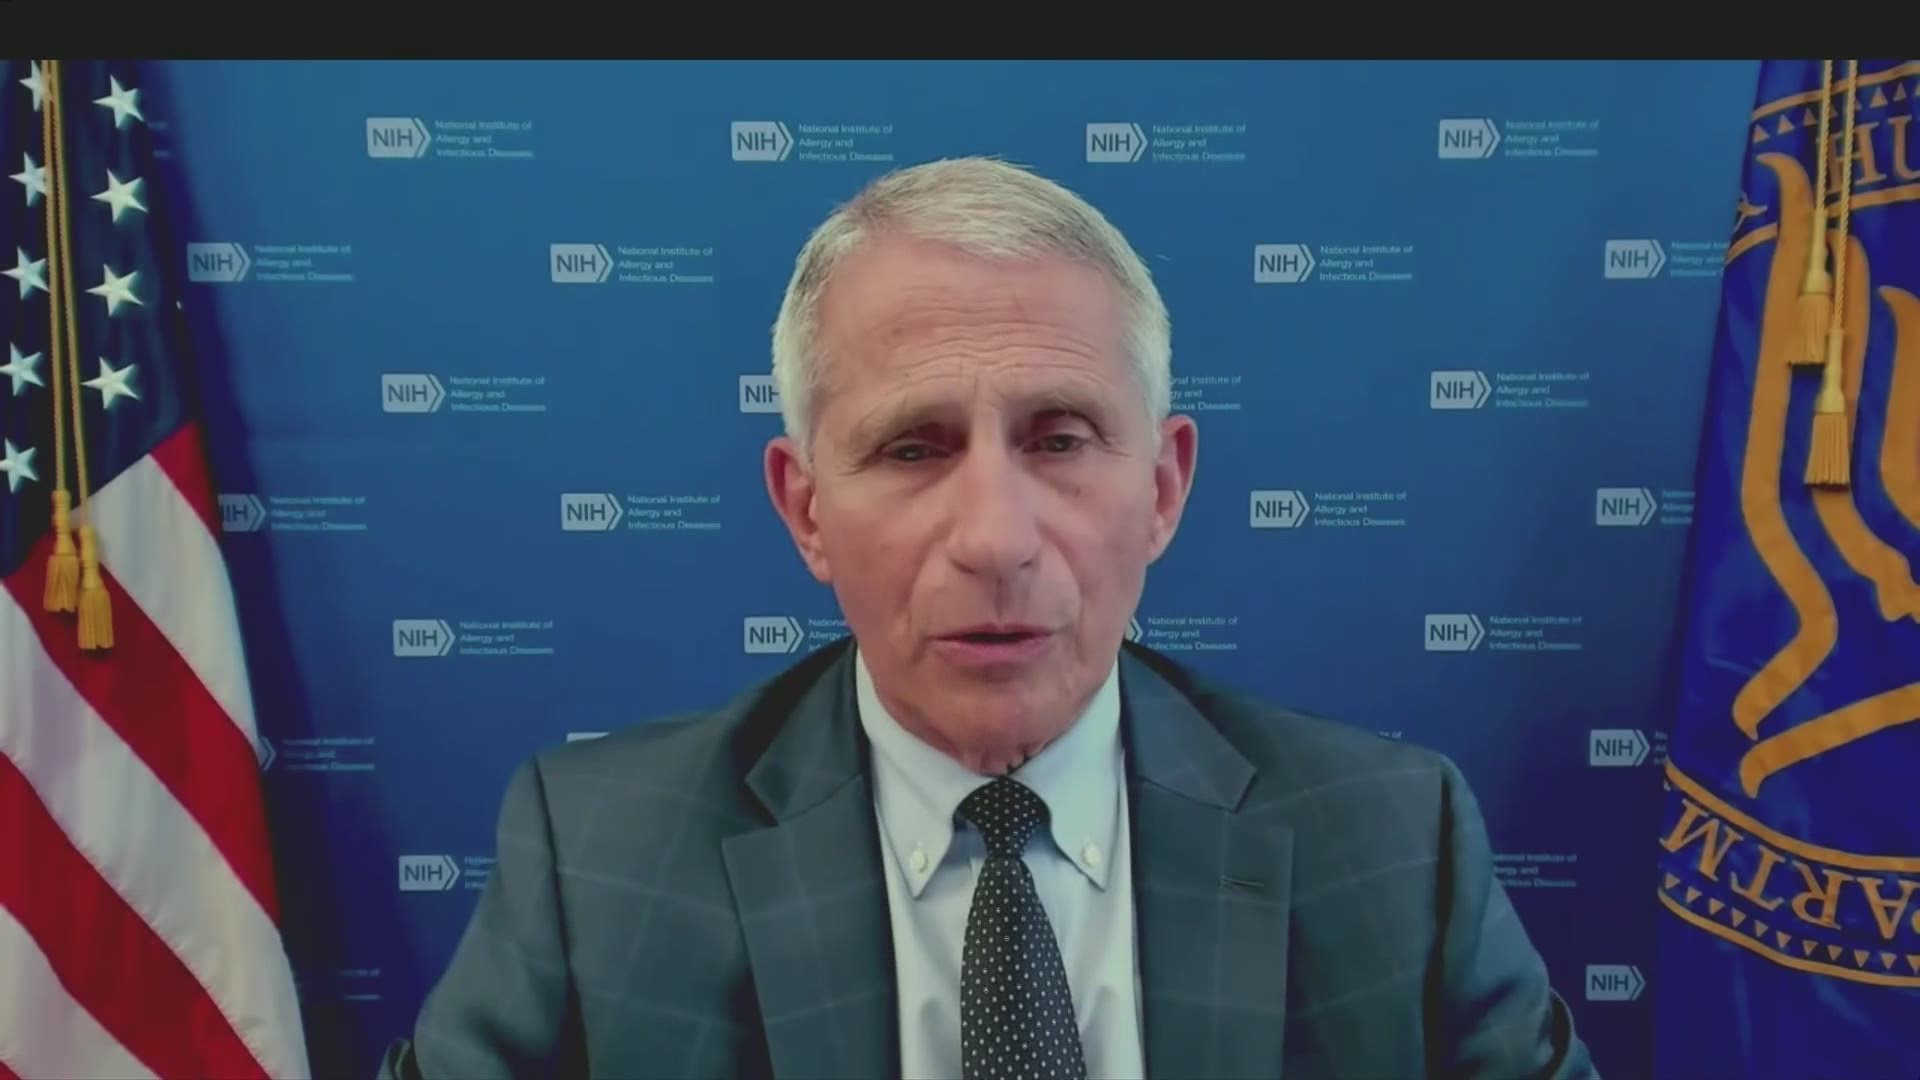 Dr. Fauci addresses how the COVID delta variant is spreading across the globe and the United States. He highlights the importance of the COVID vaccines.